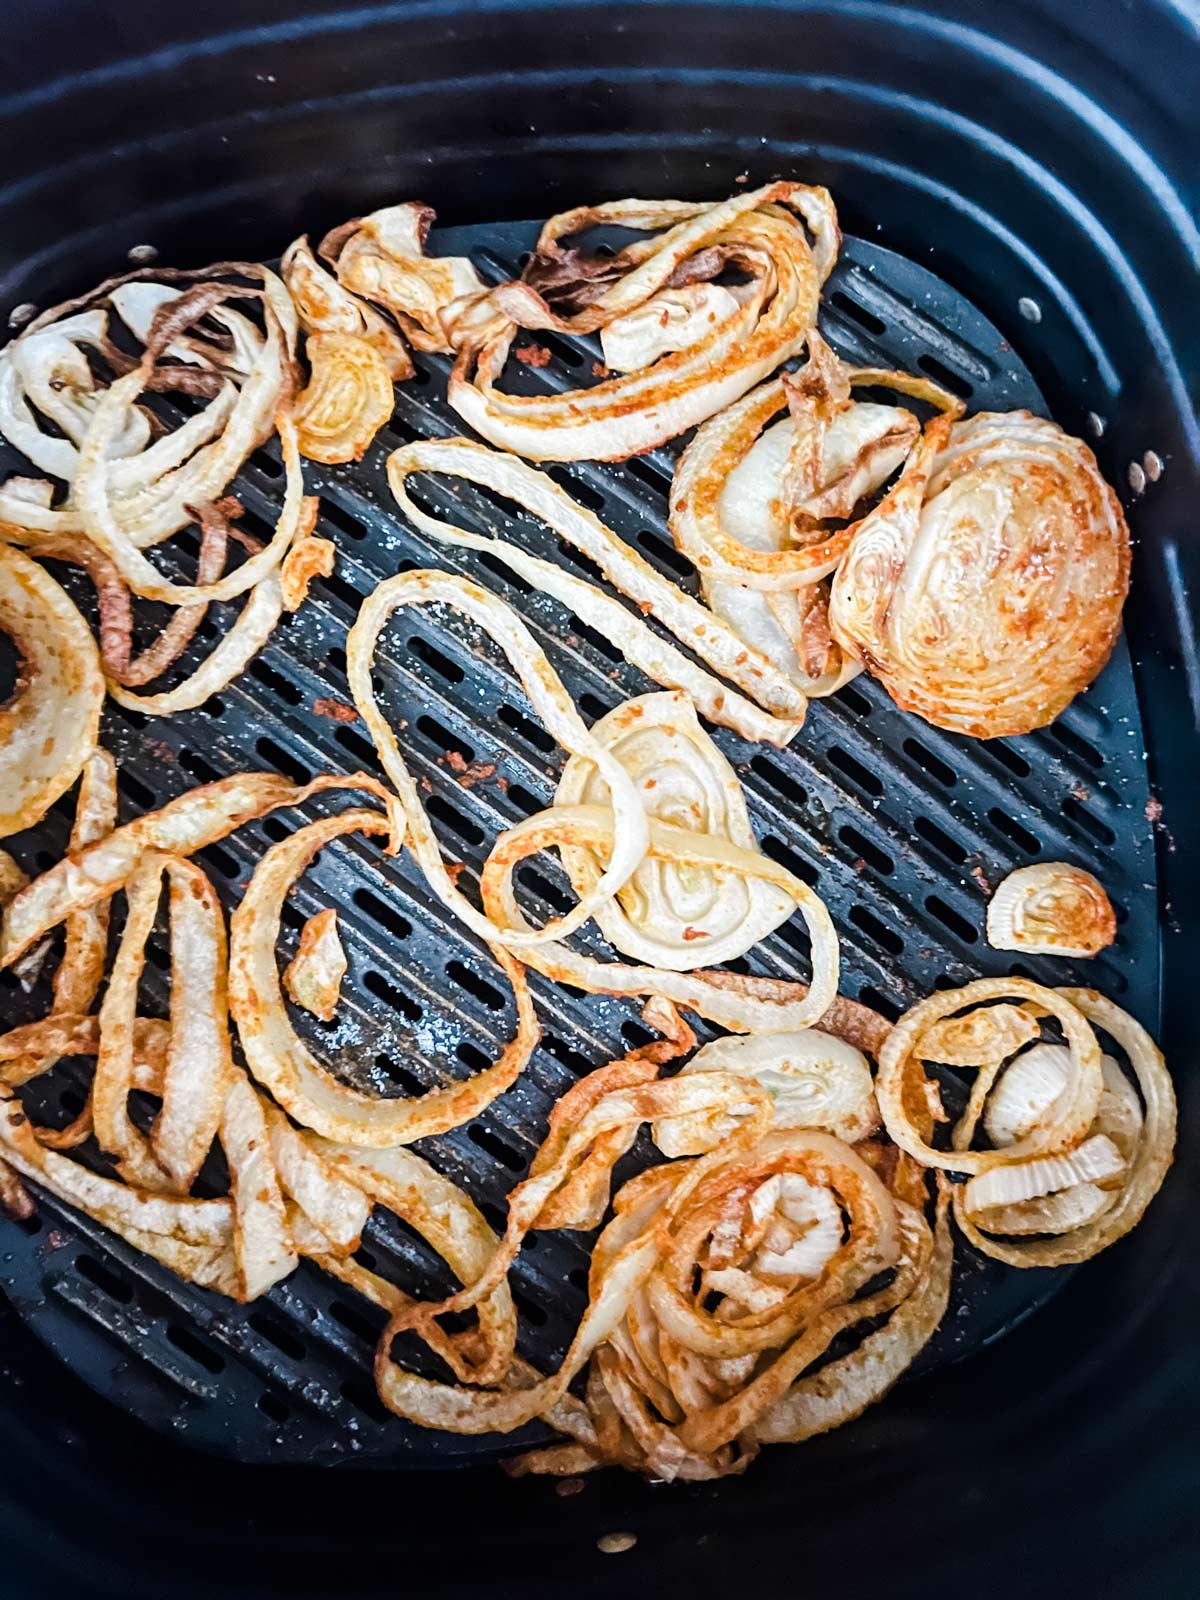 Cooked onions in an air fryer.